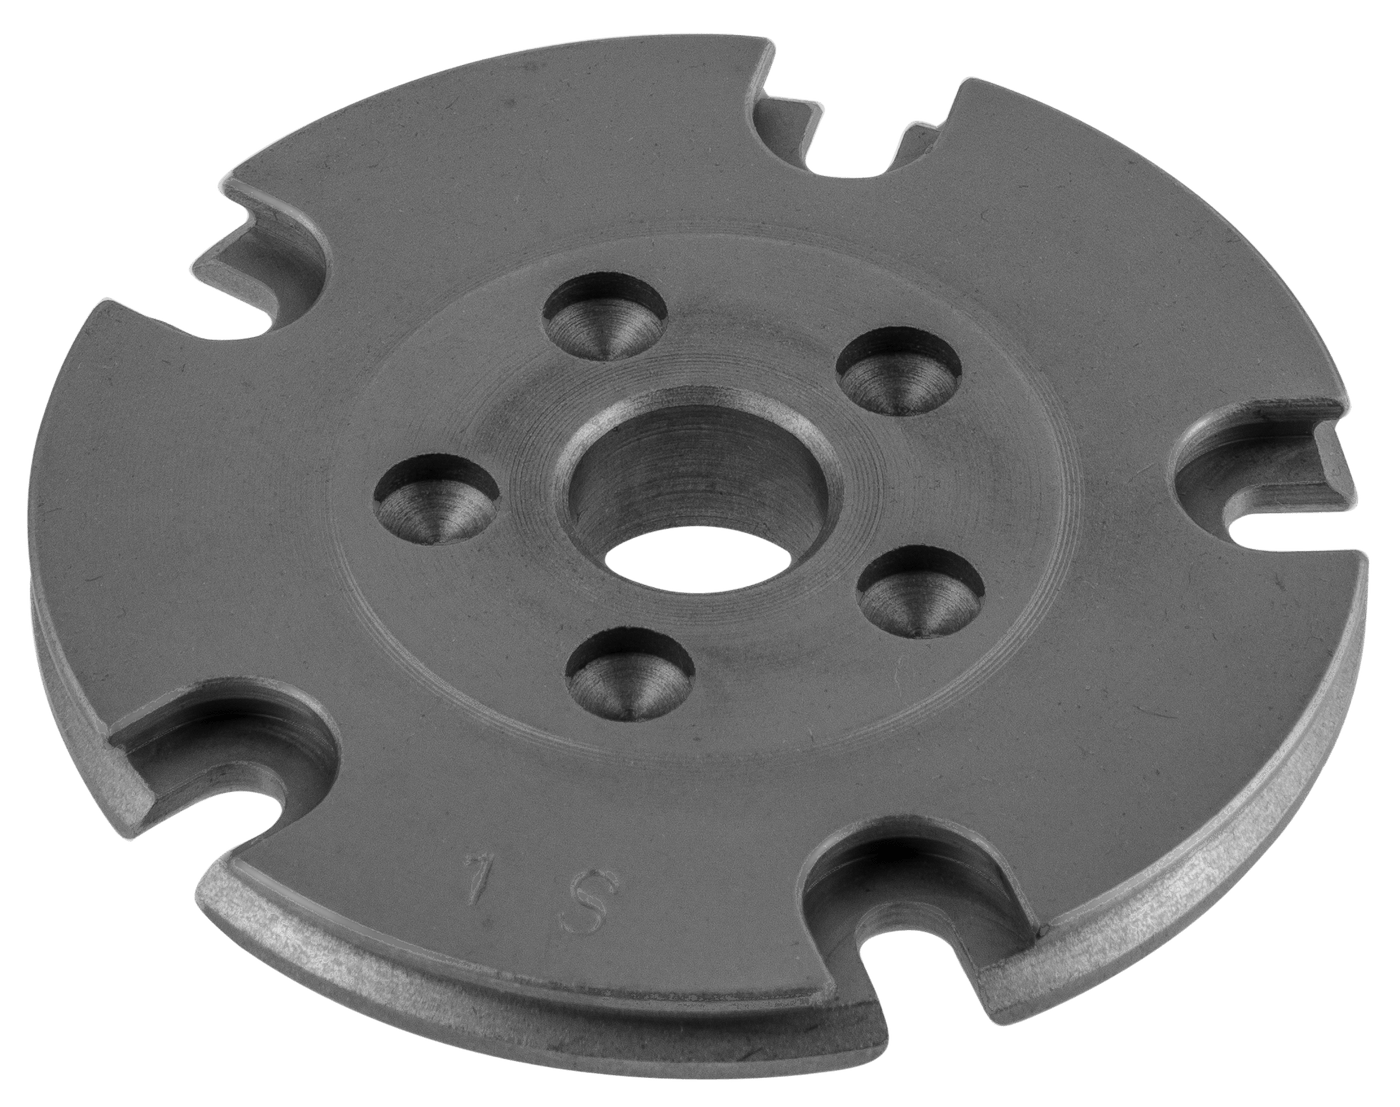 Lee Lee Shell Plate #19 - For Load-master Reloading Tools